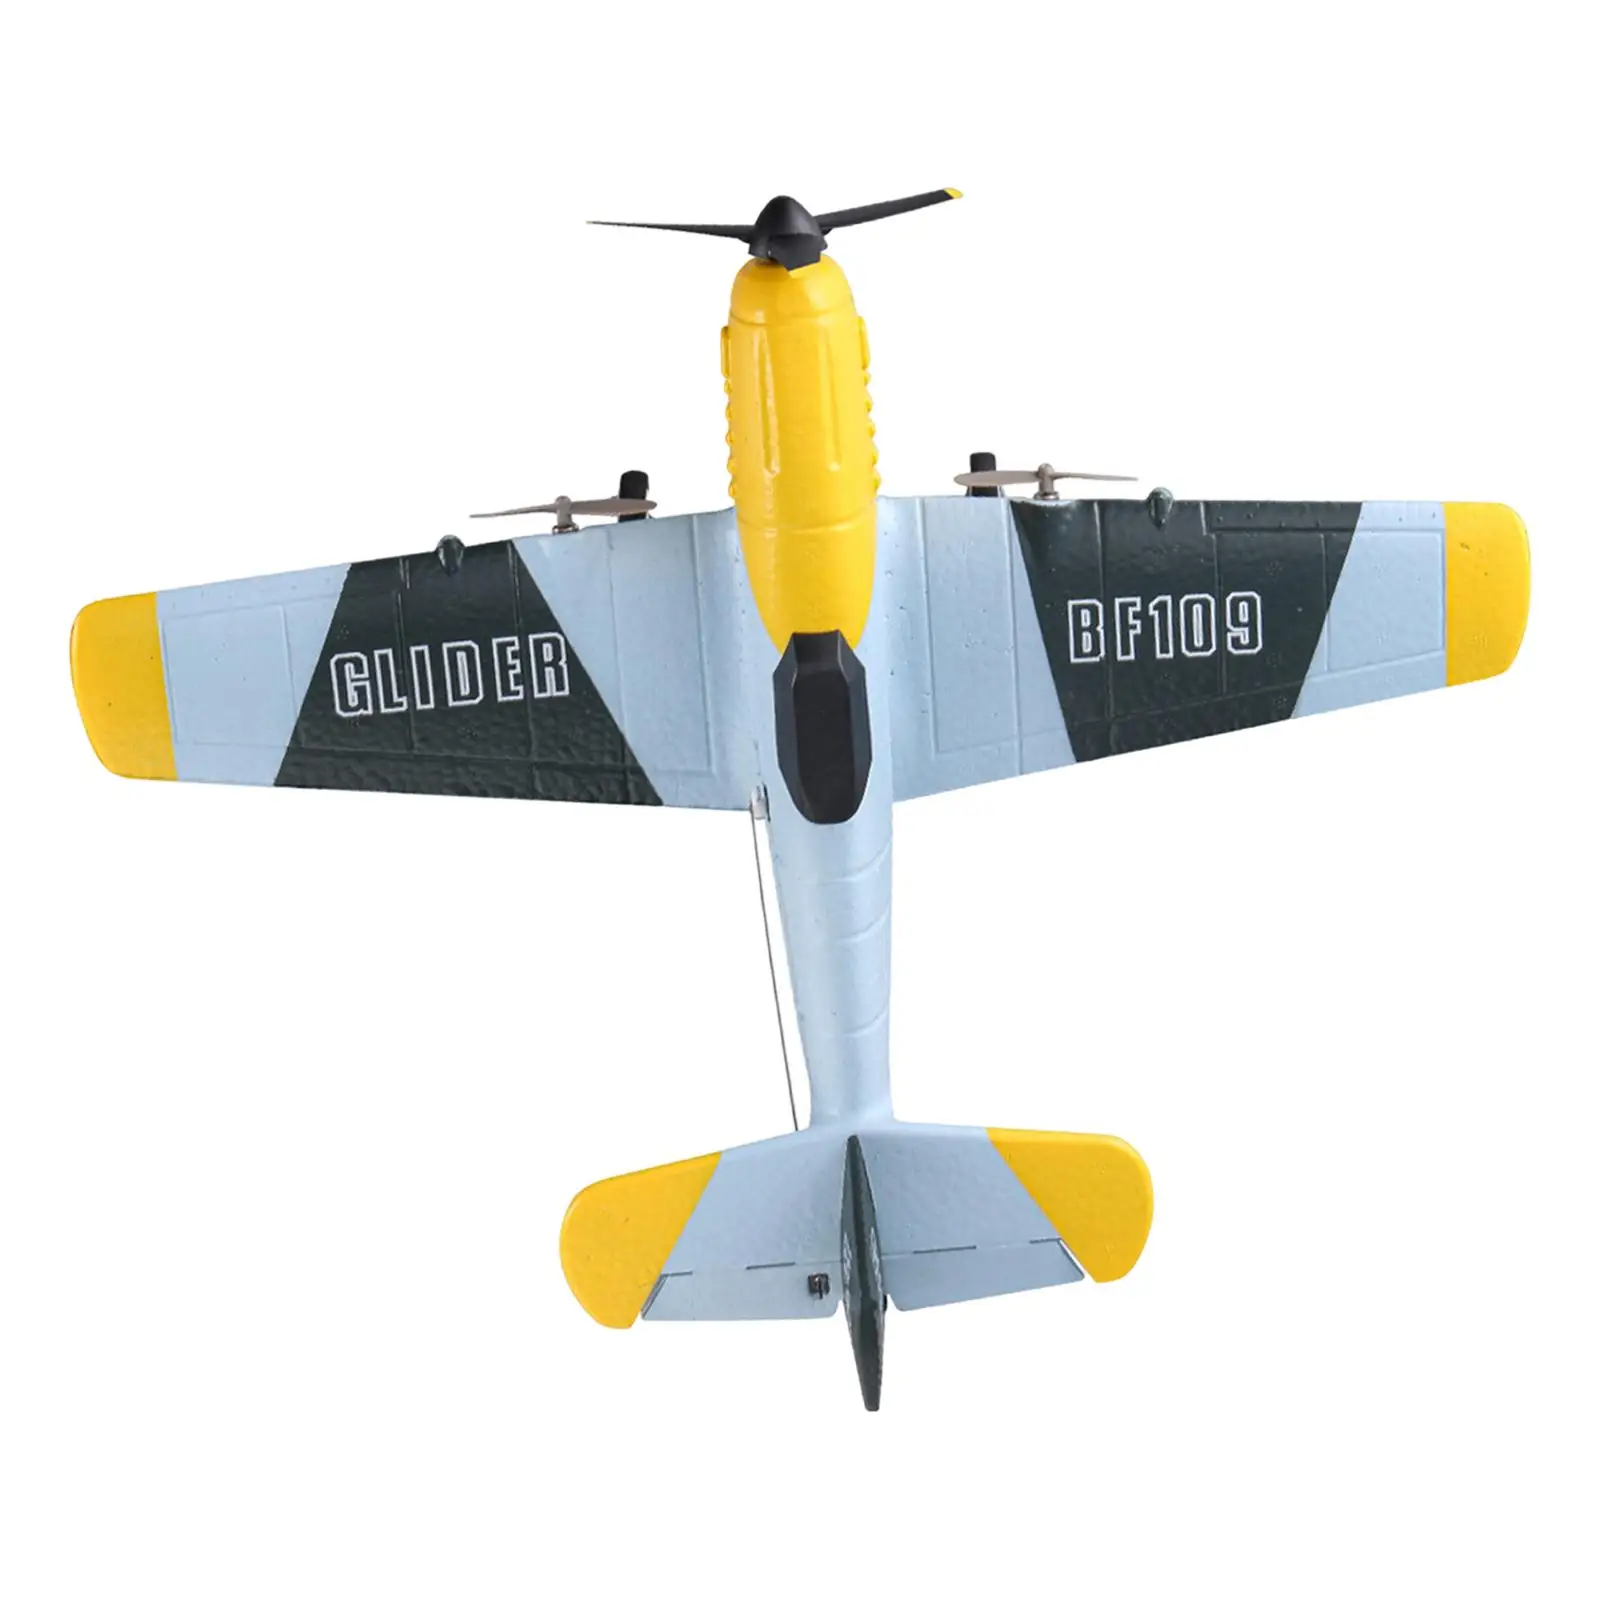 RC Plane Outdoor Flighting Toys Gift 3 Channel RC Glider Remote Control Airplane Easy to Control for Beginner Adults Boys Girls